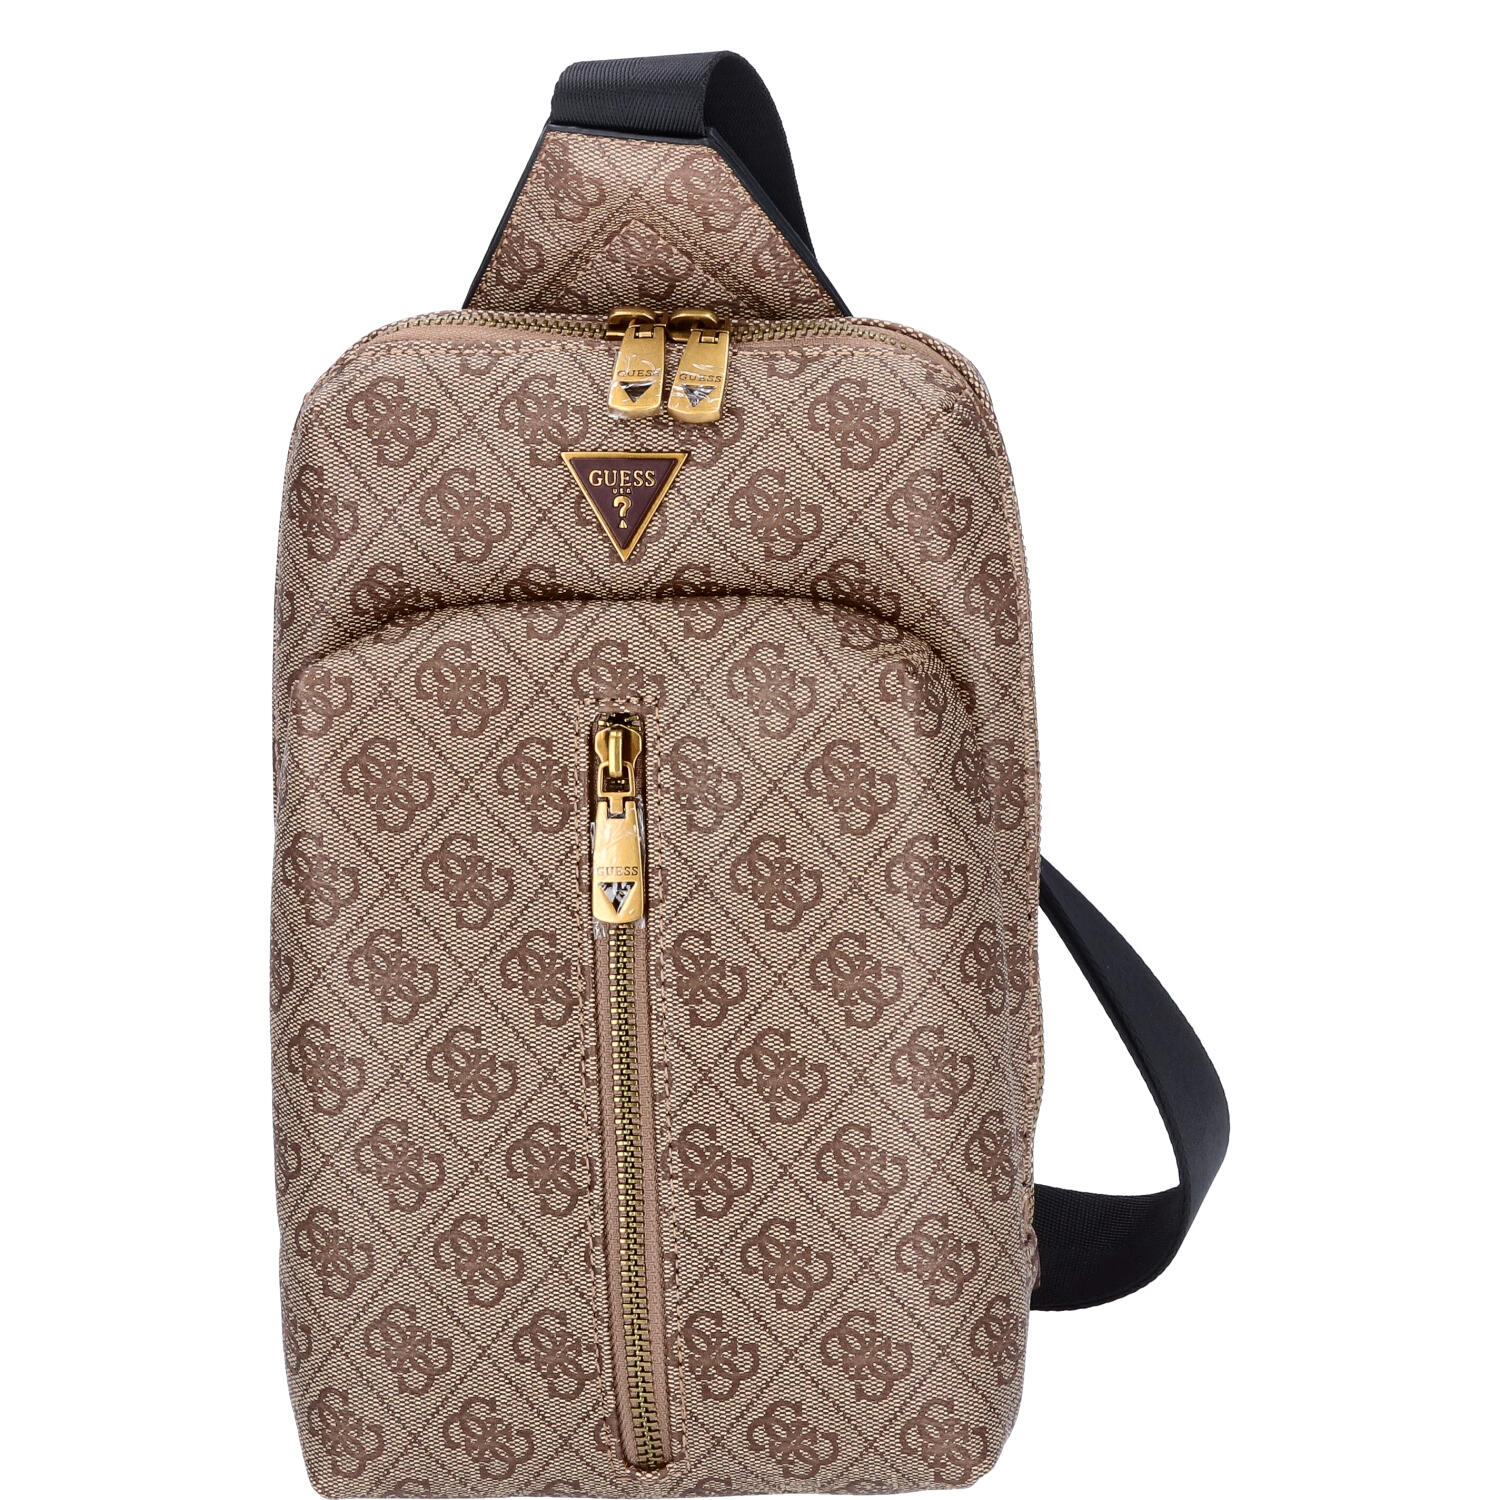 GUESS Crossover Bodybag Vezzola Eco Beige-Brown